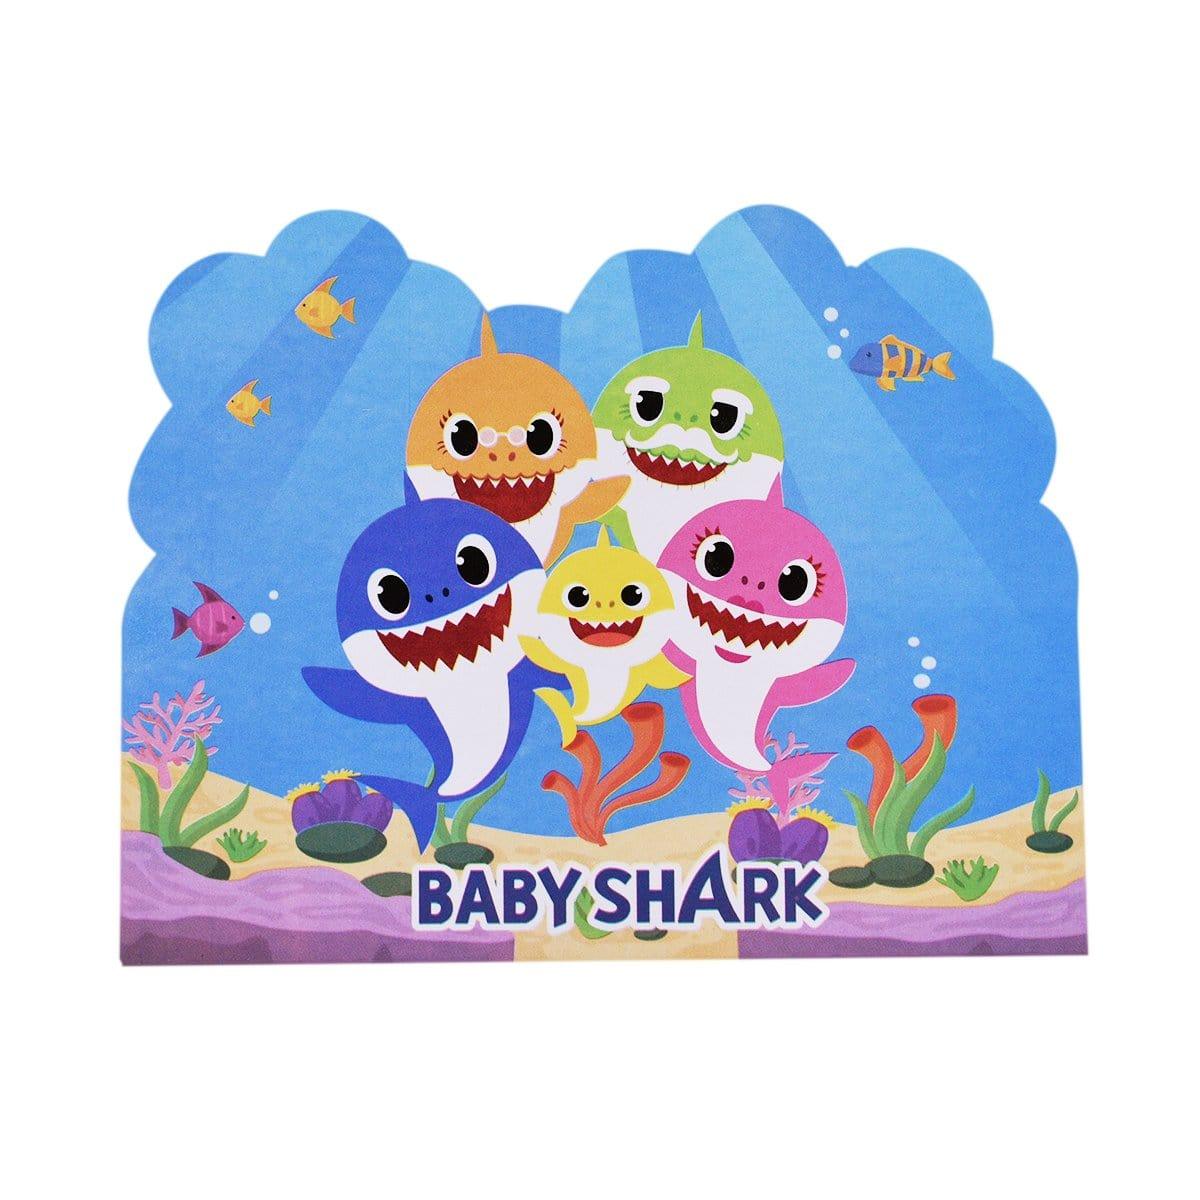 Buy Kids Birthday Baby Shark invitations, 10 per package sold at Party Expert